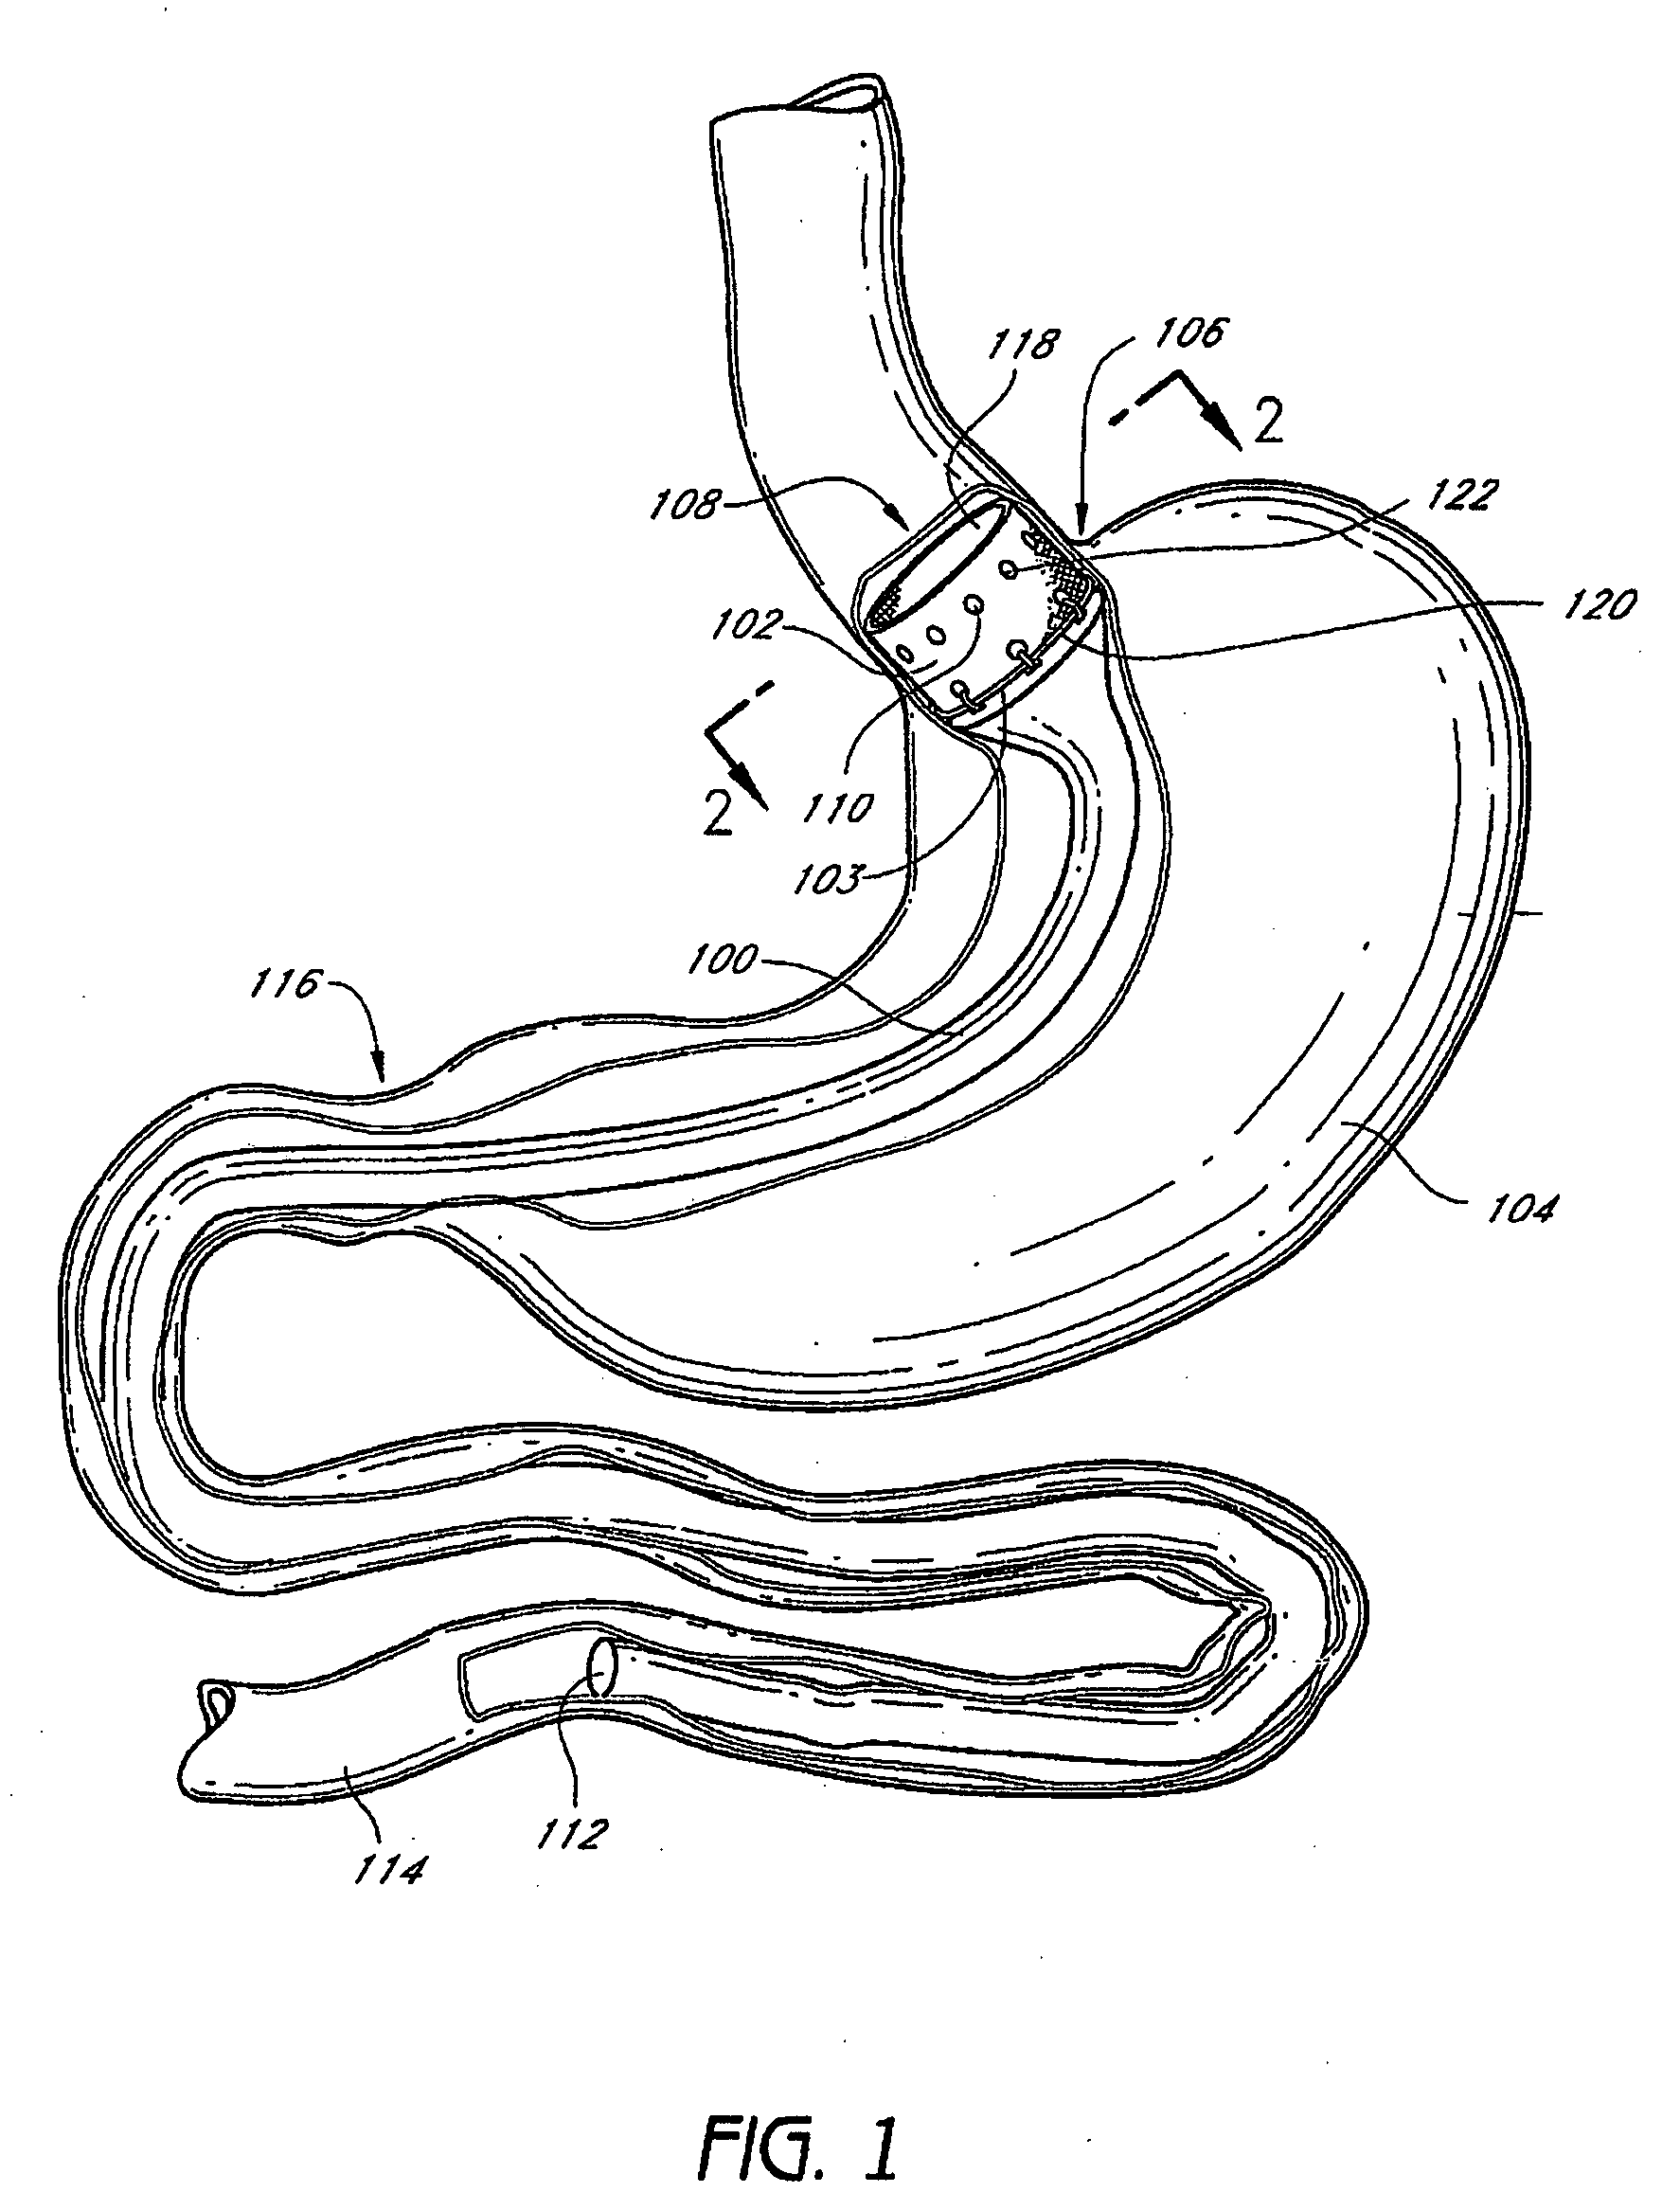 Devices and methods for endolumenal gastrointestinal bypass